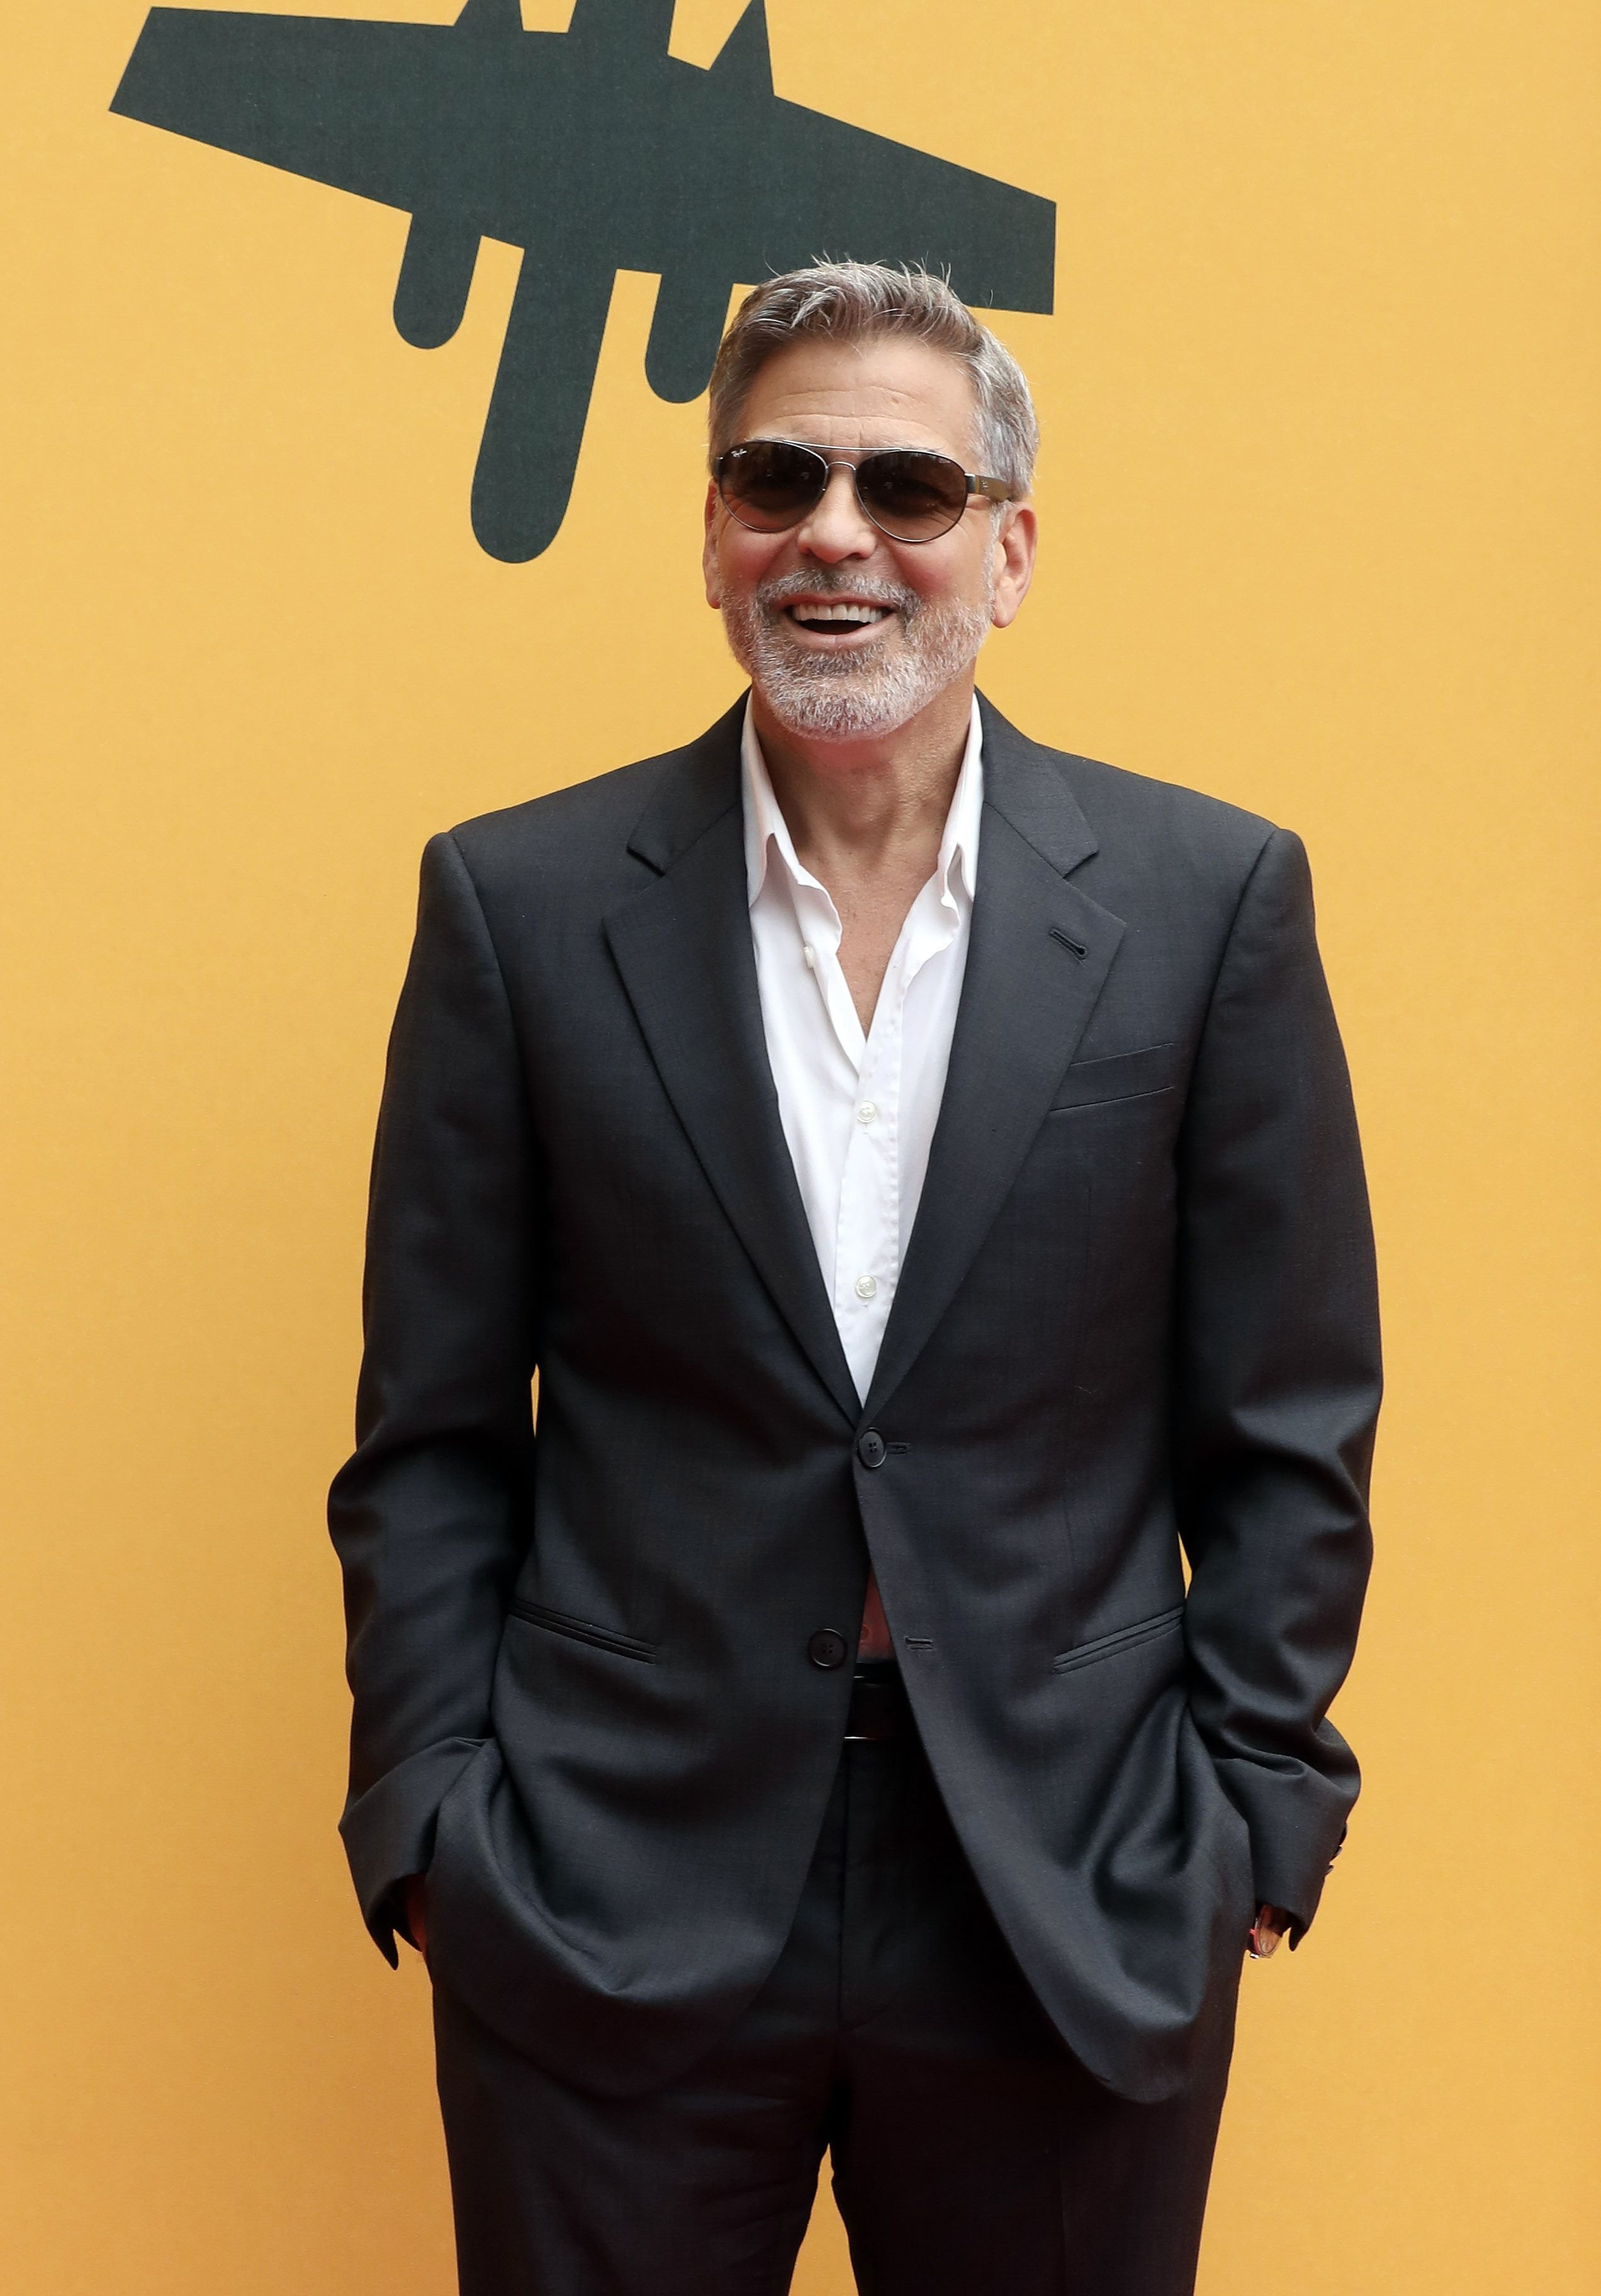 George Clooney attends the "Catch-22" photocall at The Space Moderno Cinema on May 13, 2019 | Getty Images